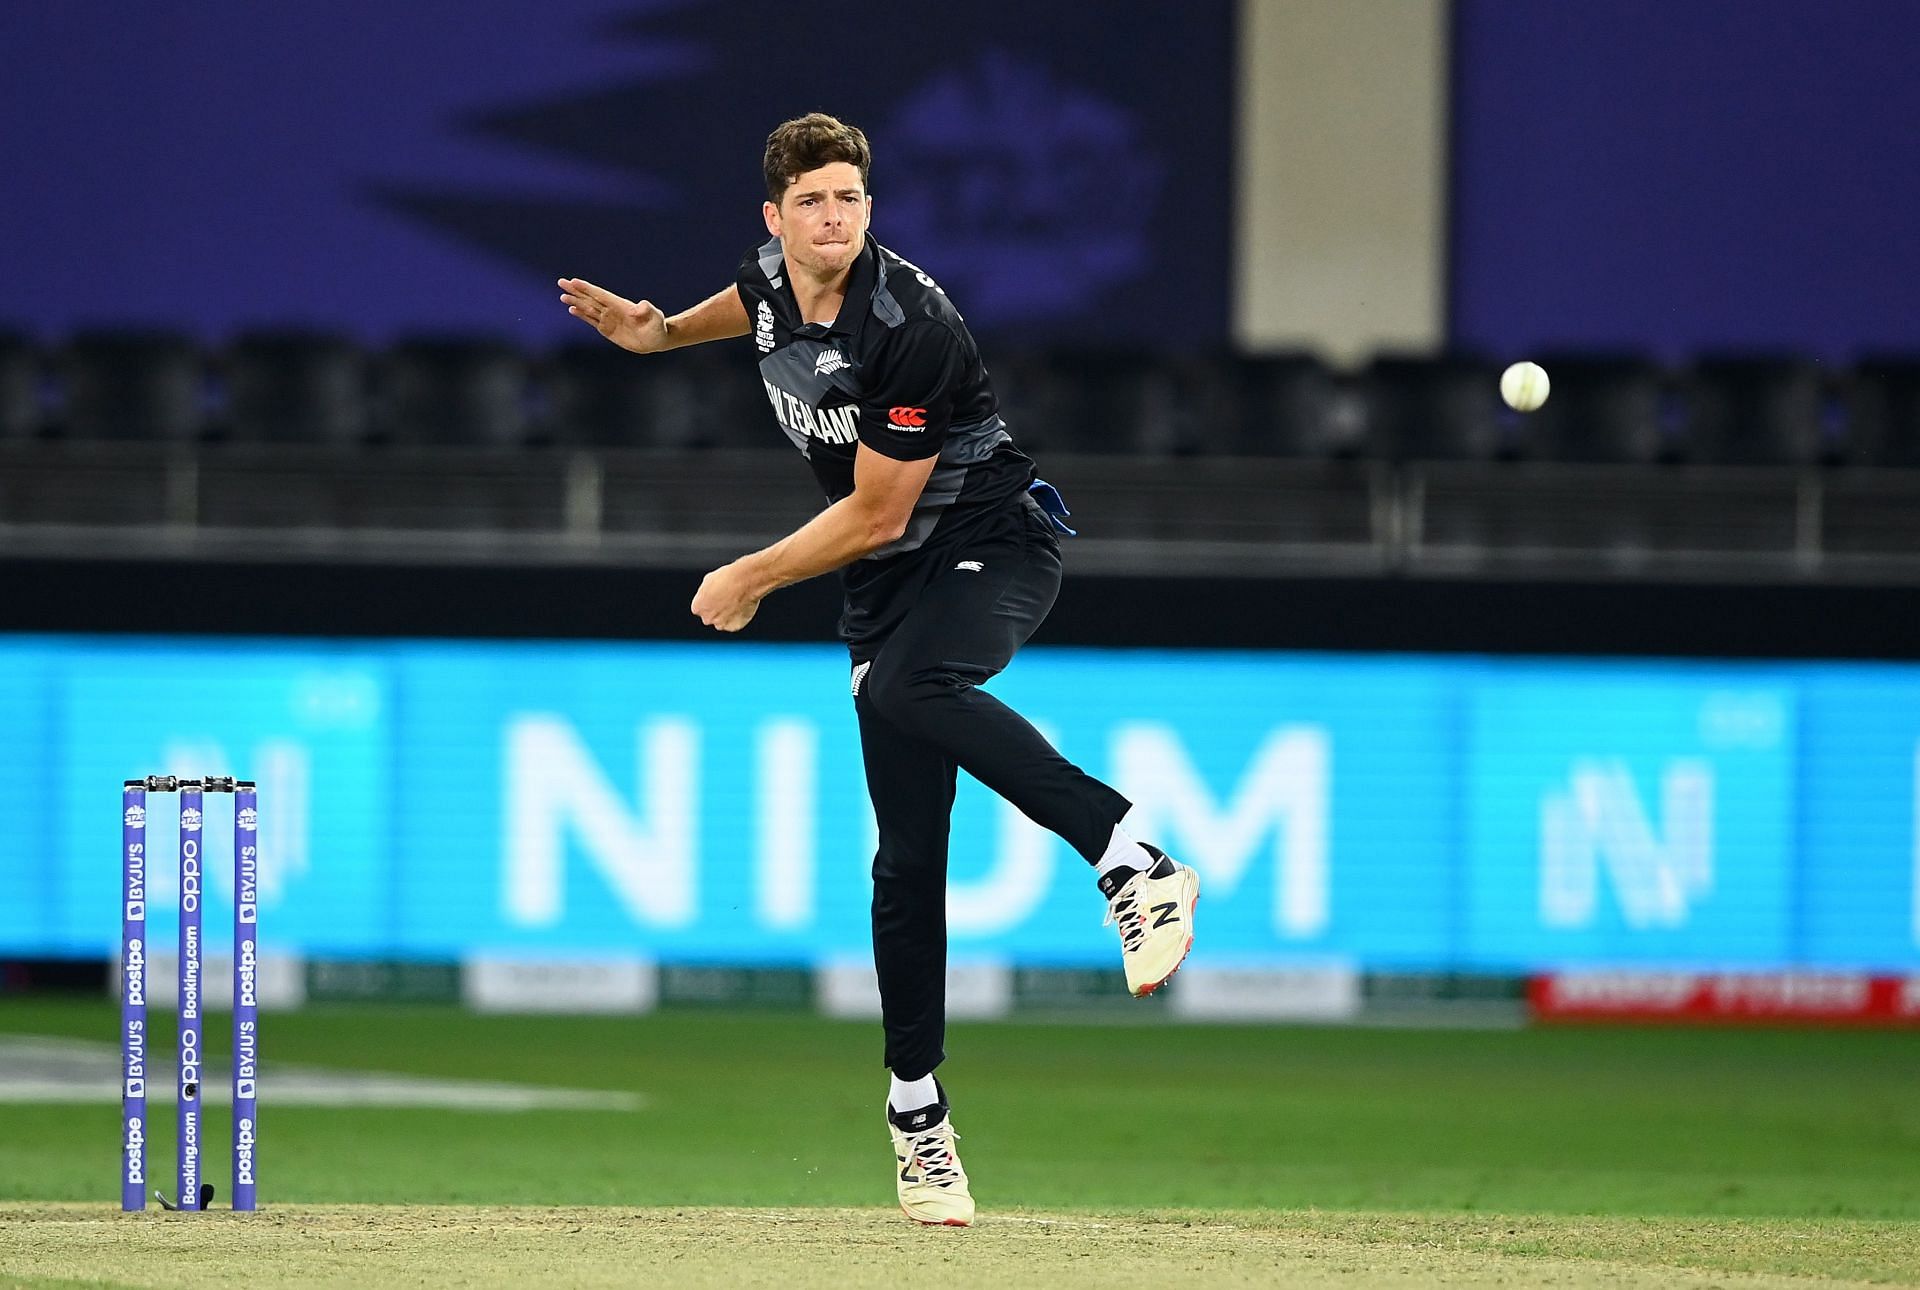 Mitchell Santner proved to be an able ally for Ish Sodhi